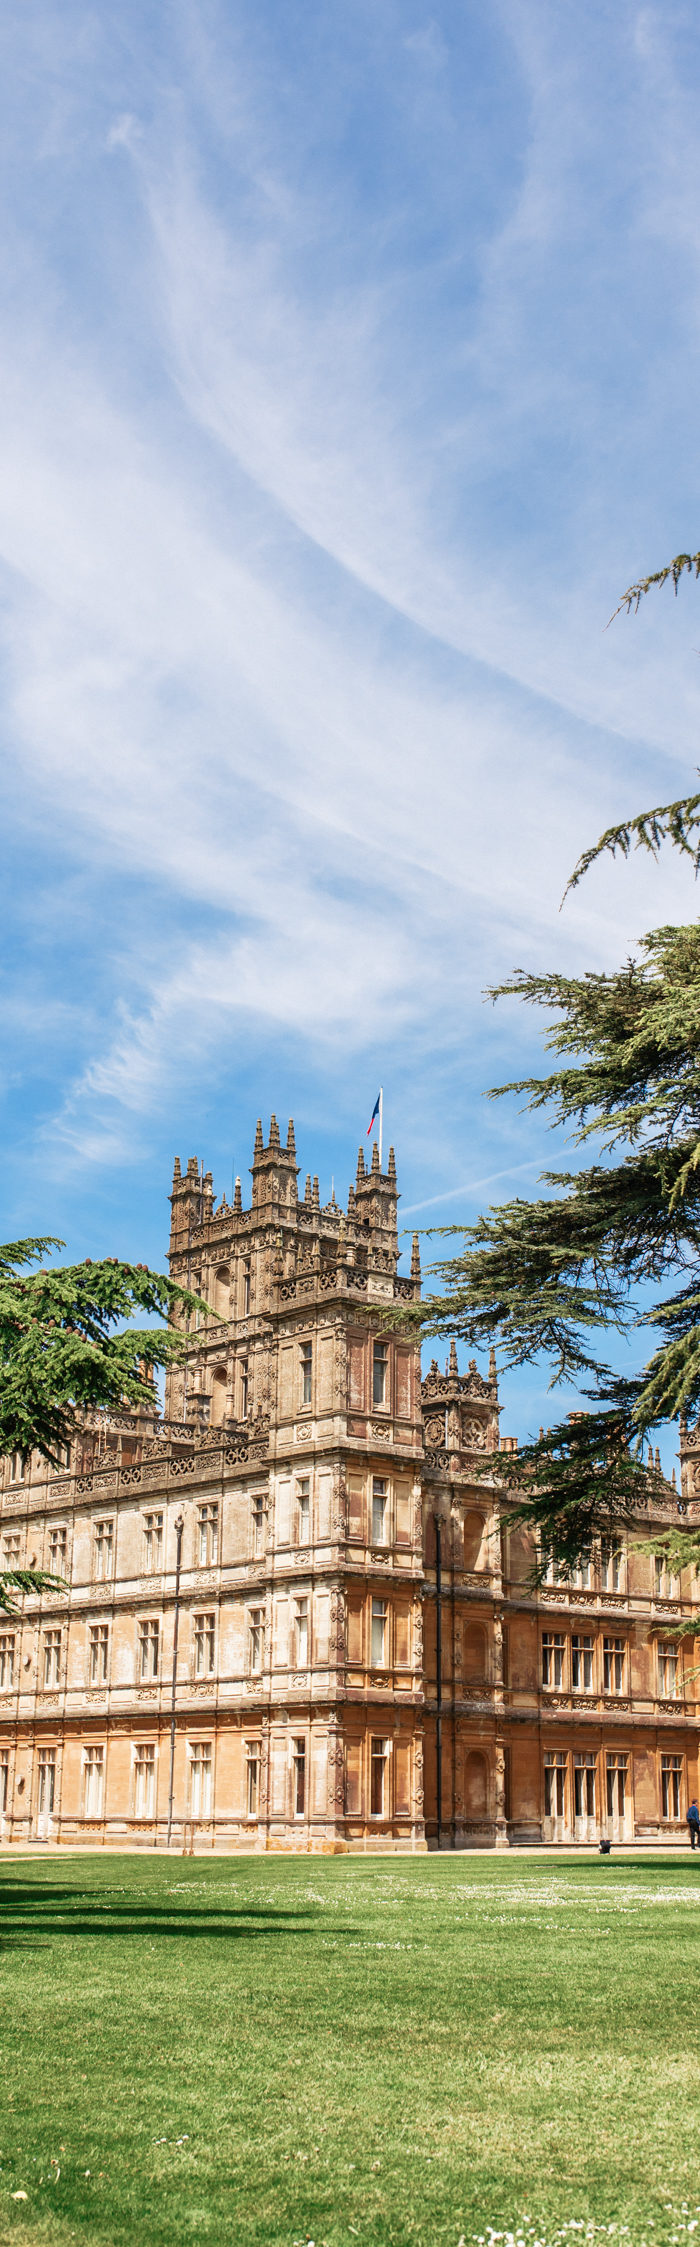 Alyssa Campanella of The A List blog visits Downton Abbey locations at Highclere Castle